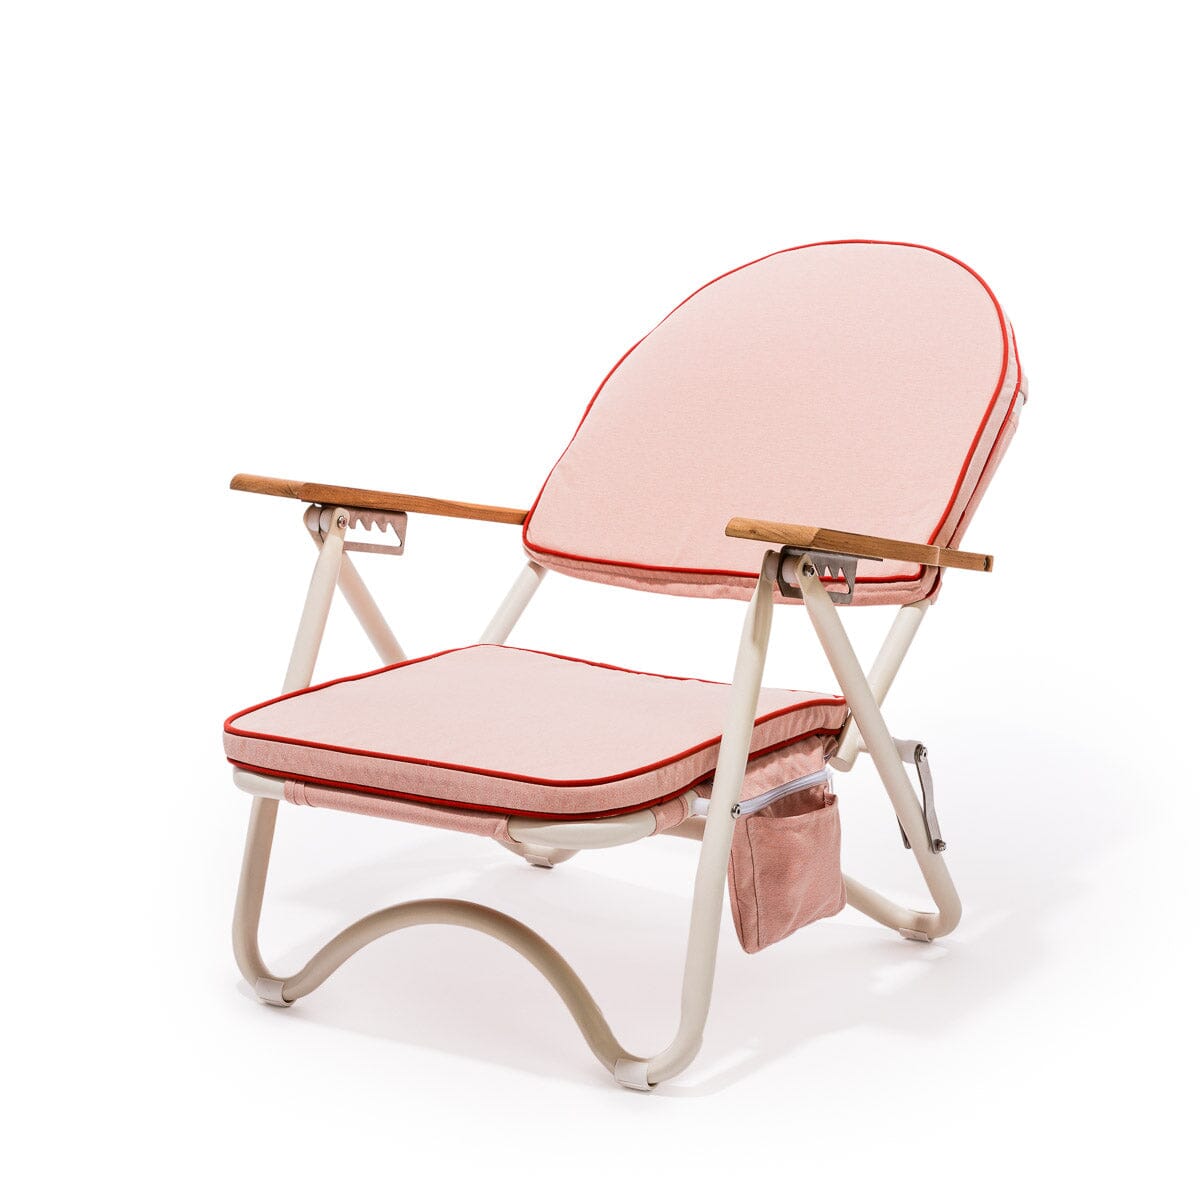 The Pam Chair - Rivie Pink Pam Chair Business & Pleasure Co 